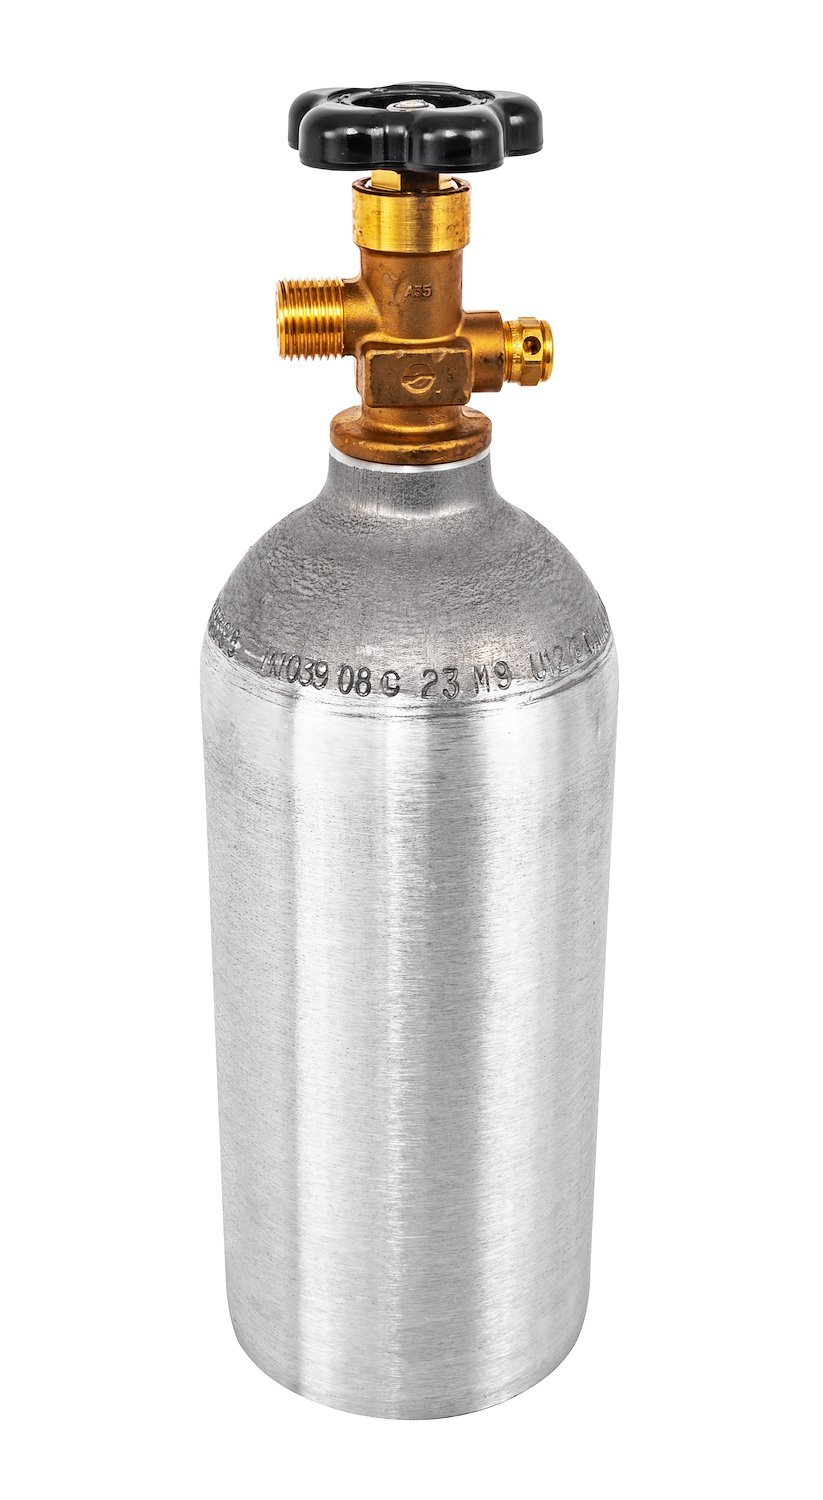 CO2 Bottle with Valve Length: 14"